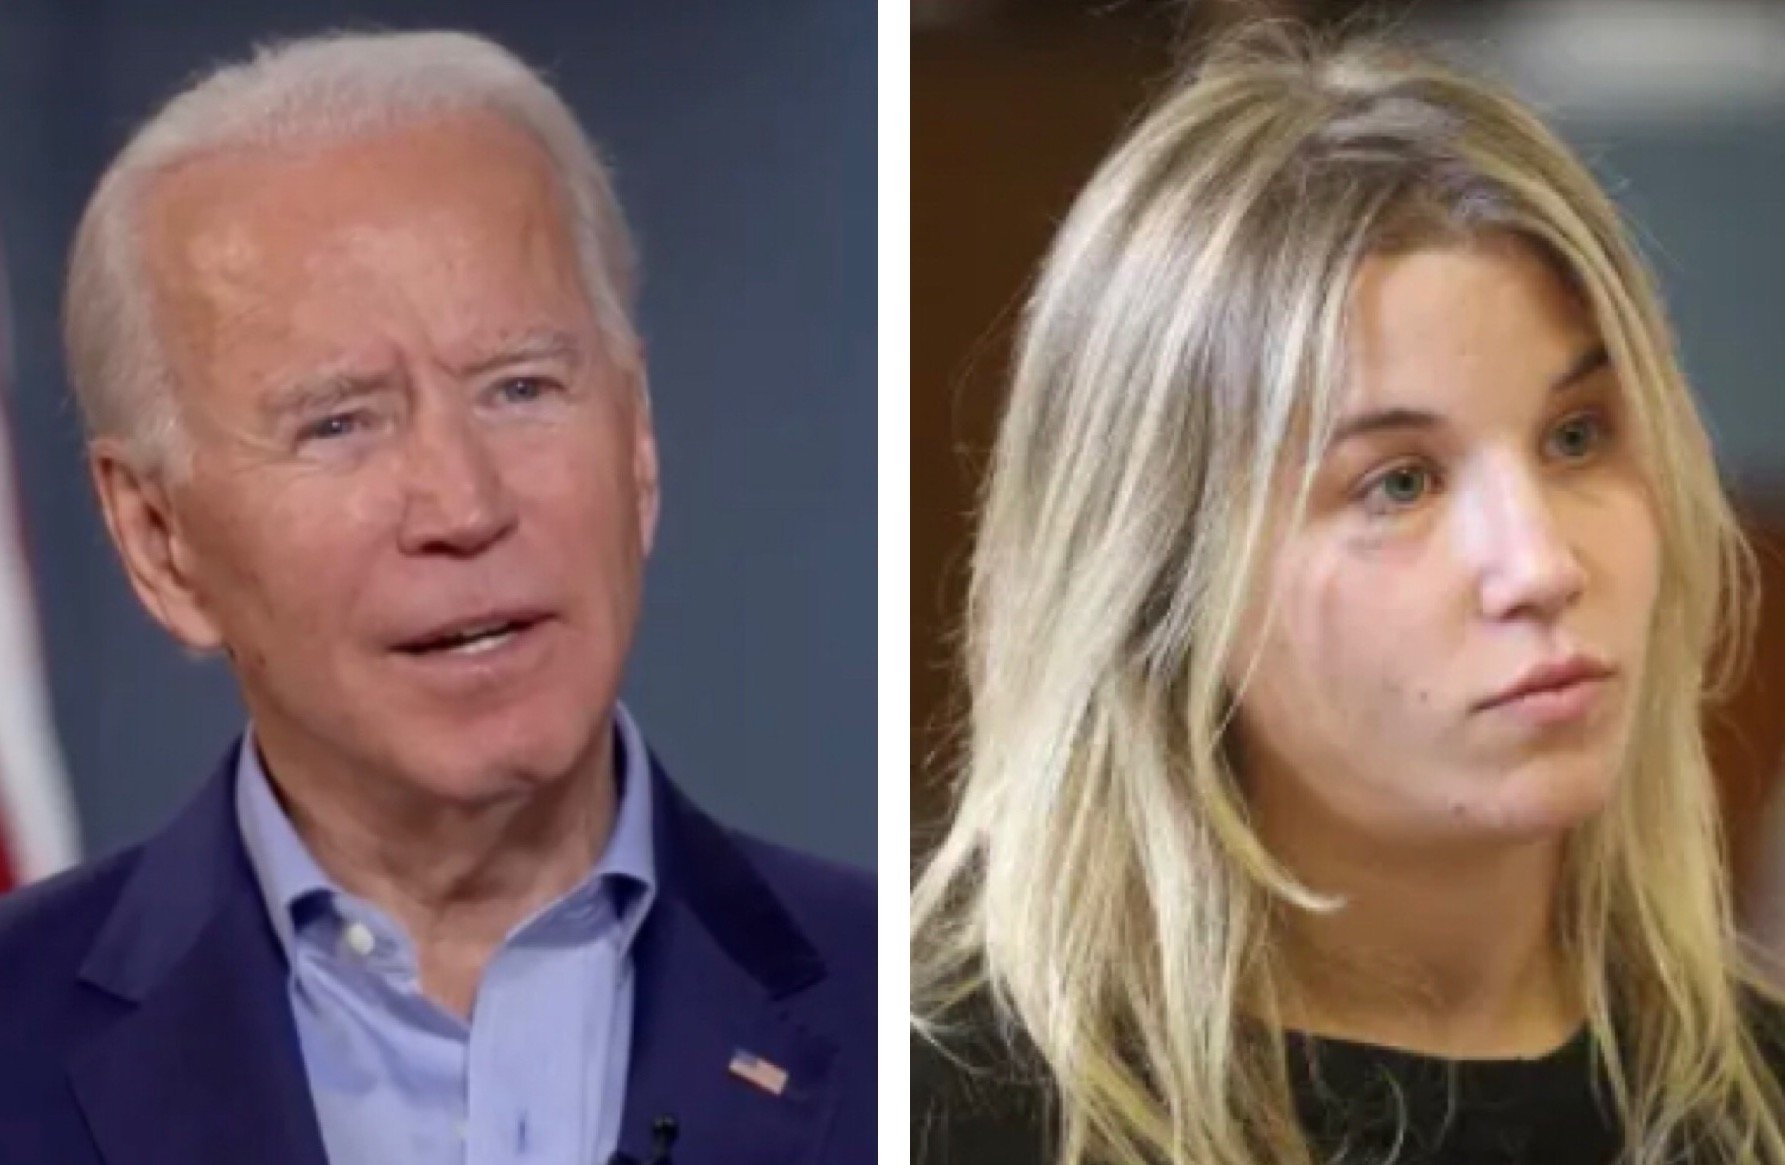 Joe Biden's Niece Avoids Jail Time For DUI After Striking Deal with District Attorney